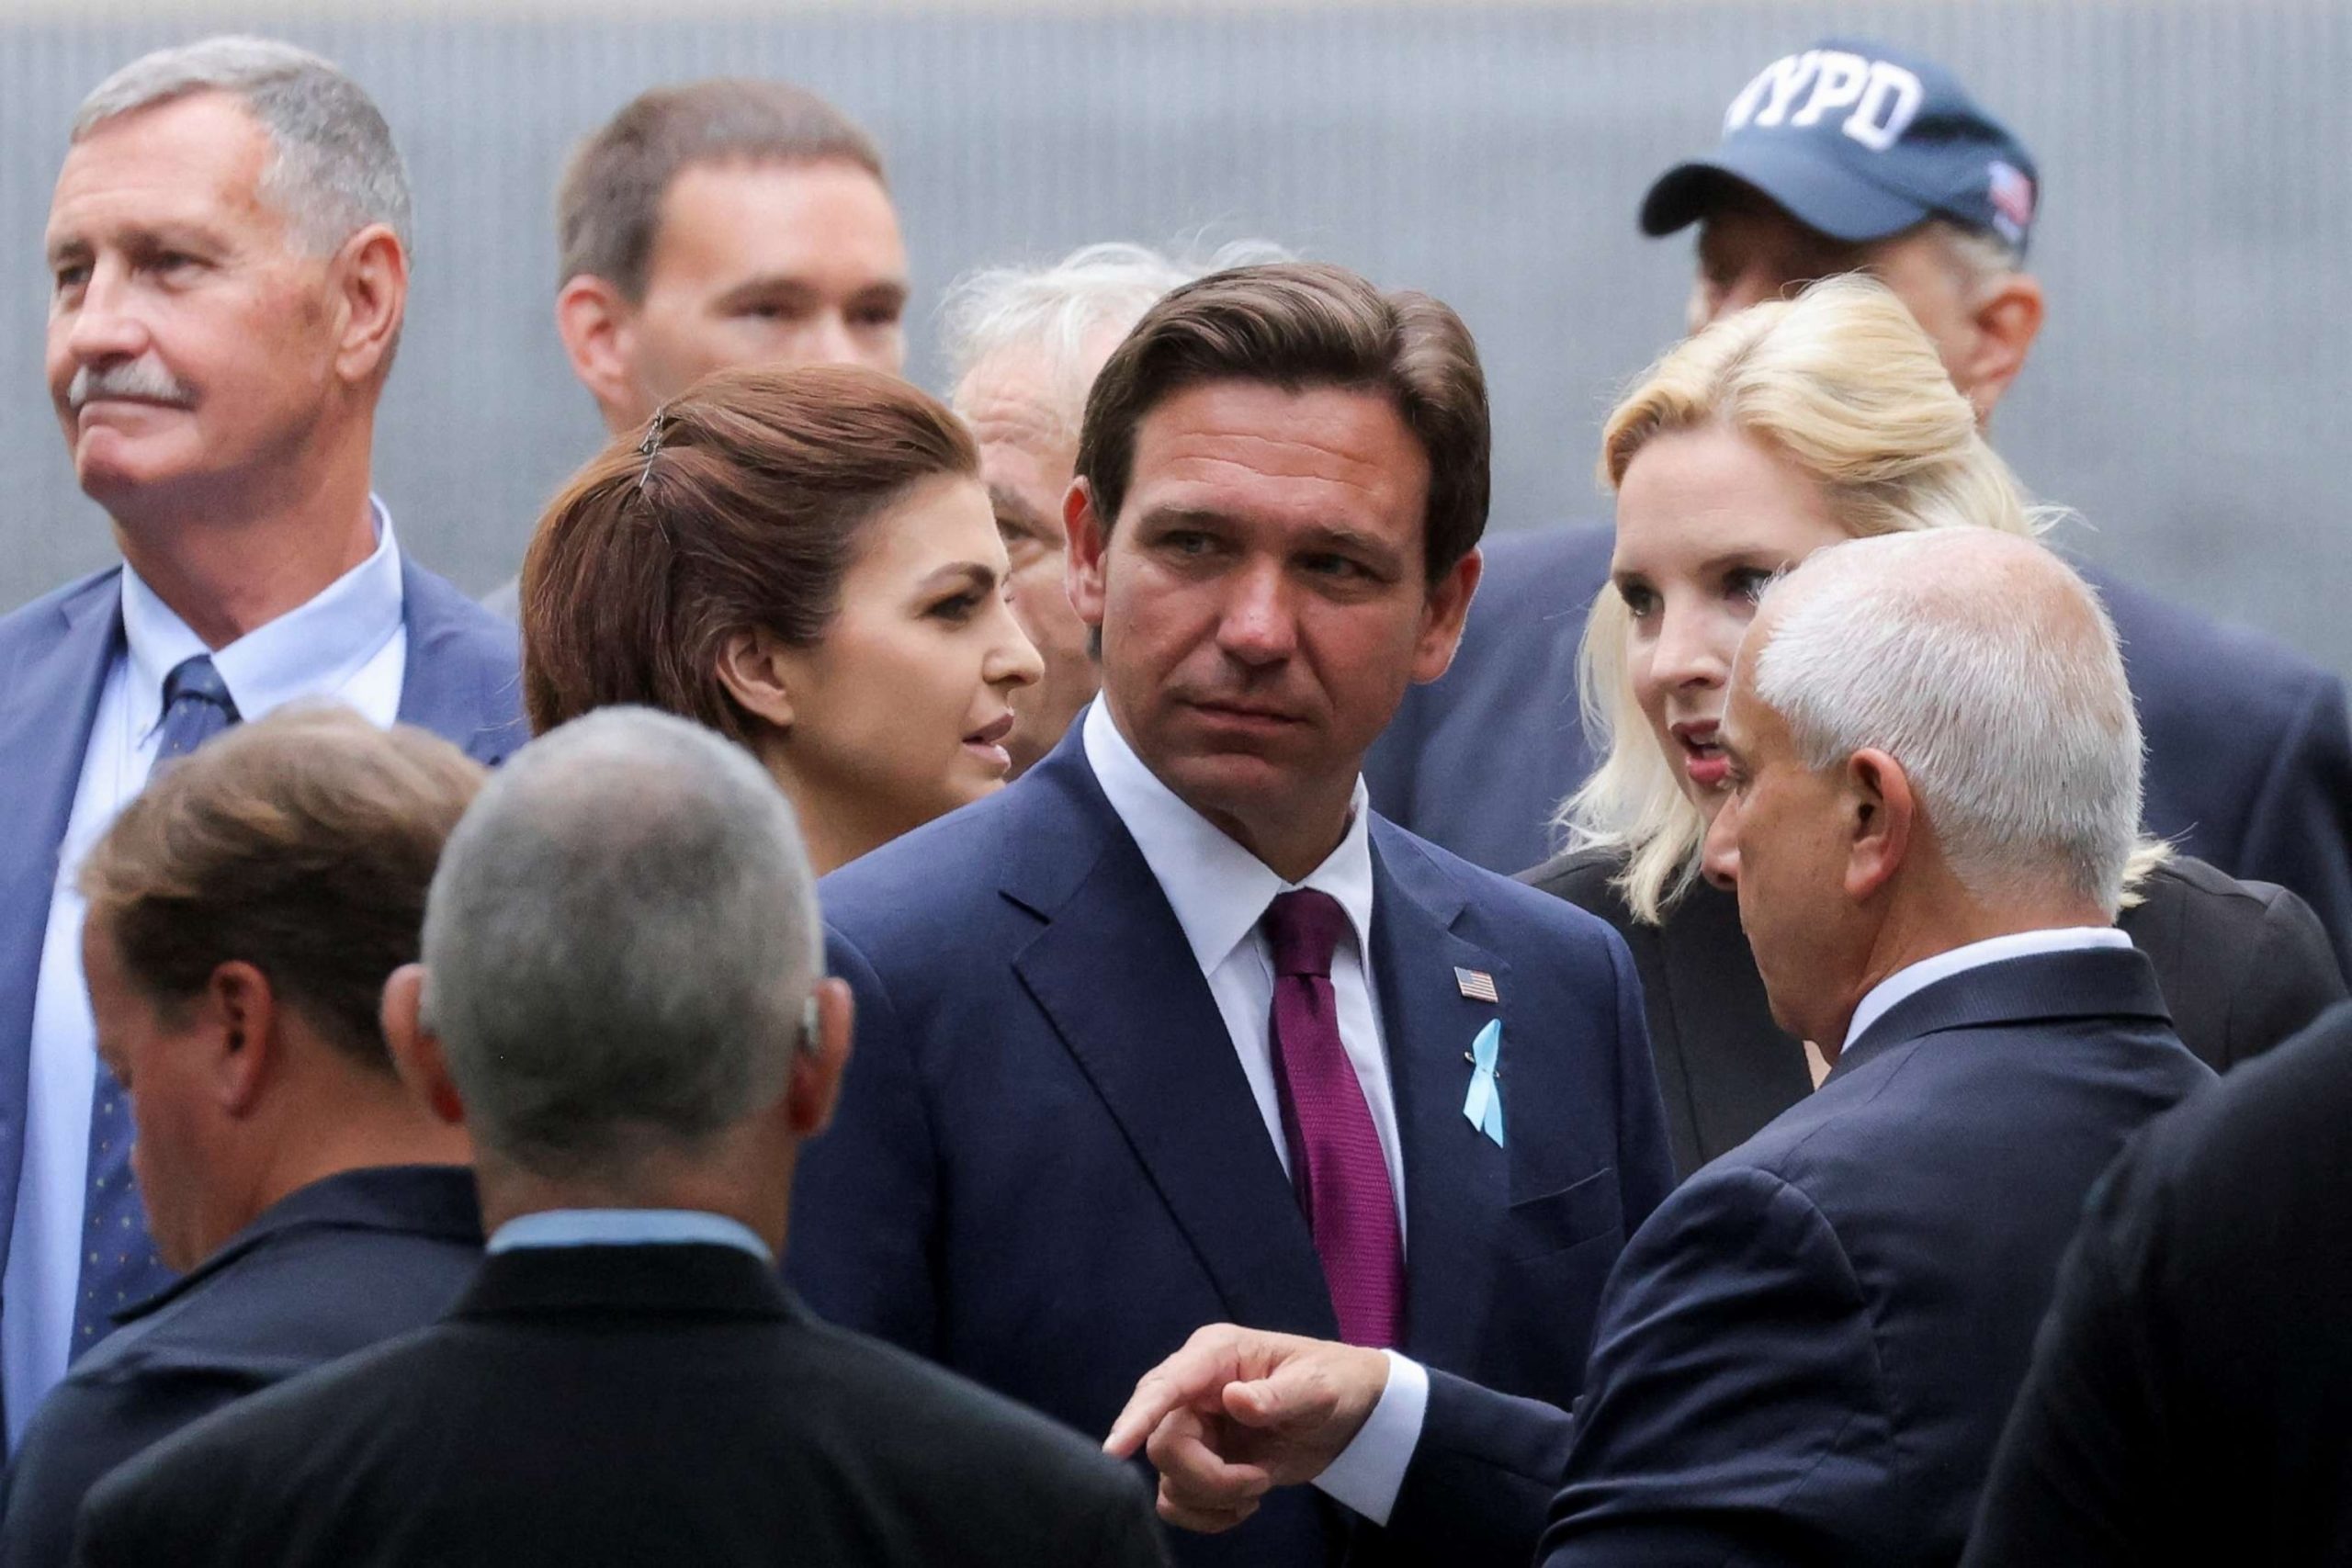 DeSantis Advocates for 'Transparency and Accountability' During Visit with 9/11 Families